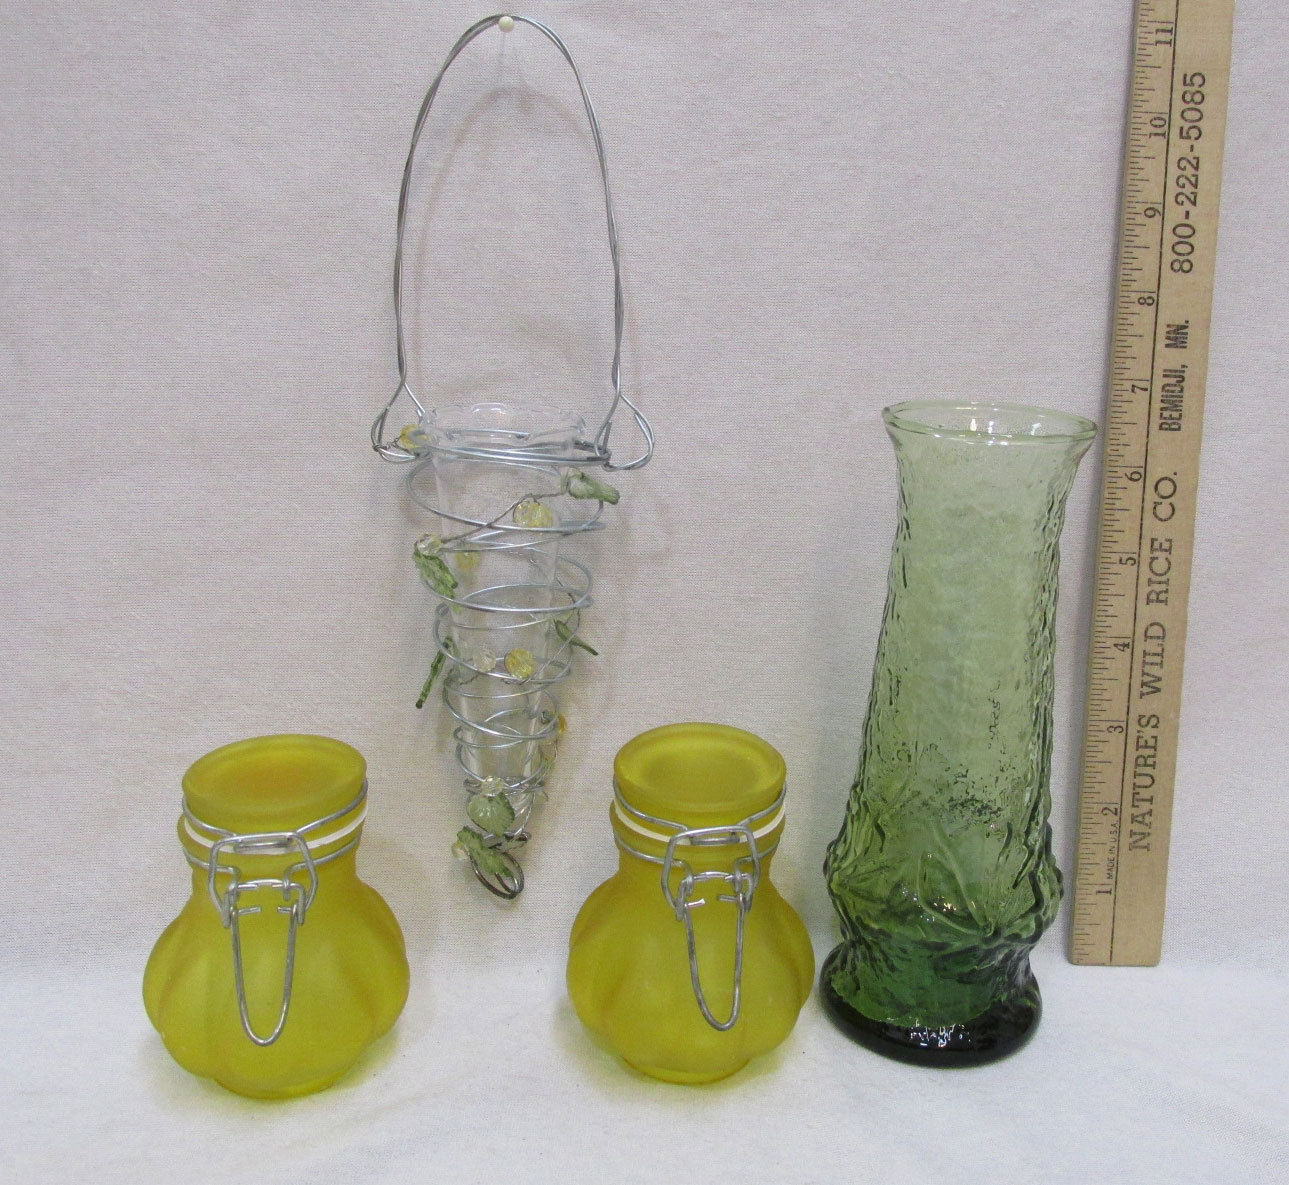 mini clear glass bud vases of hanging bud vase glass jars green yellow and 50 similar items with regard to hanging bud vase glass jars green yellow shade leaf bead charms floral lot of 4